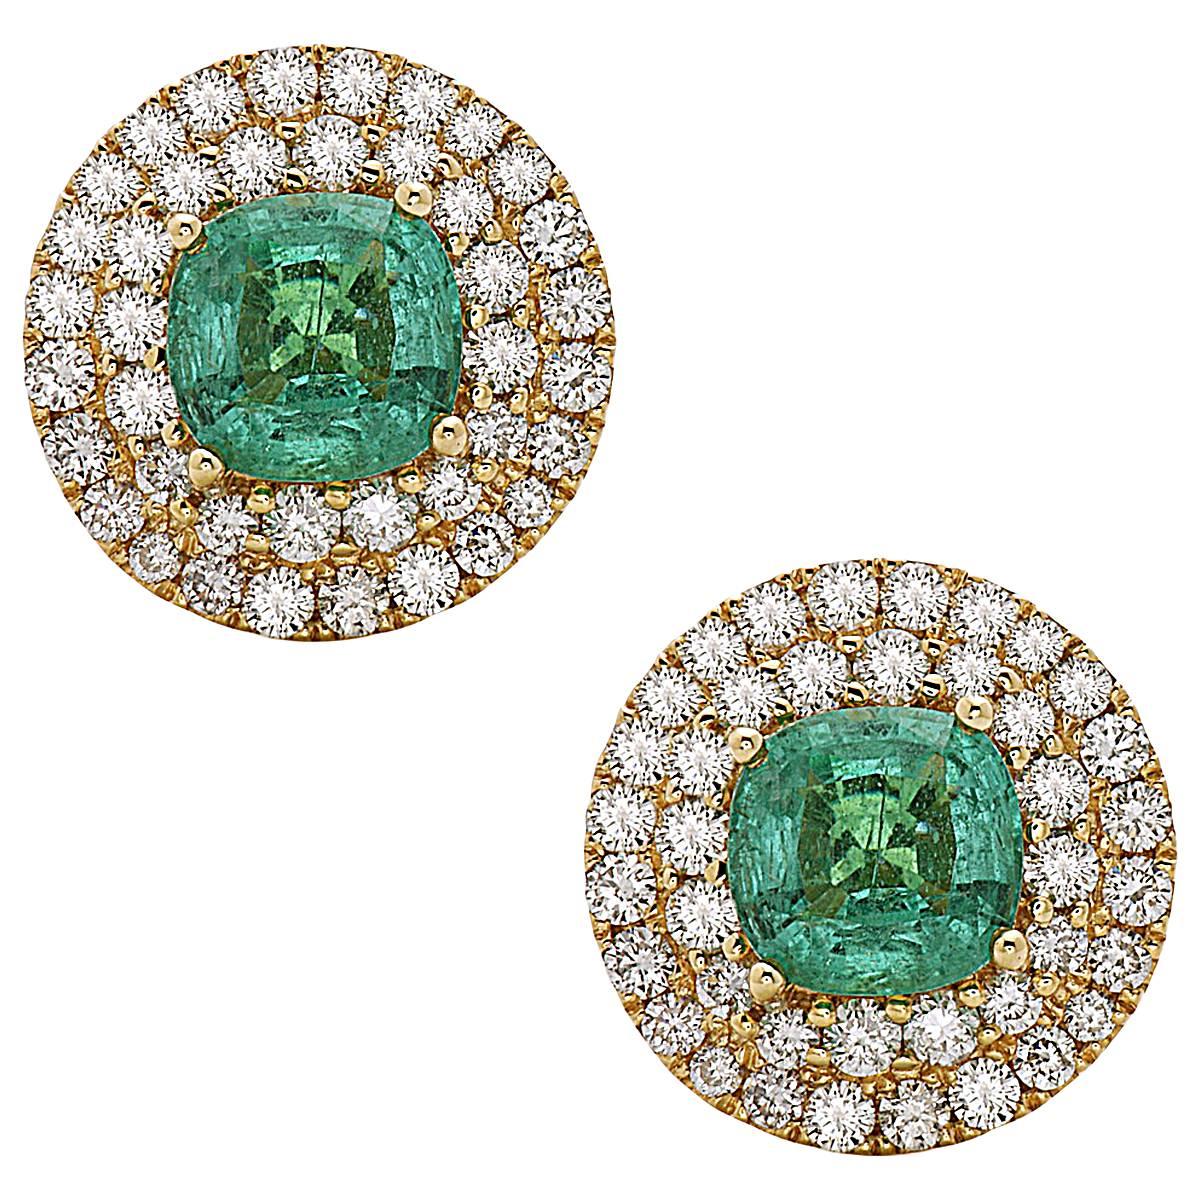 3.93ct Emerald Stud Earrings With Diamonds Made In 18k Gold For Sale